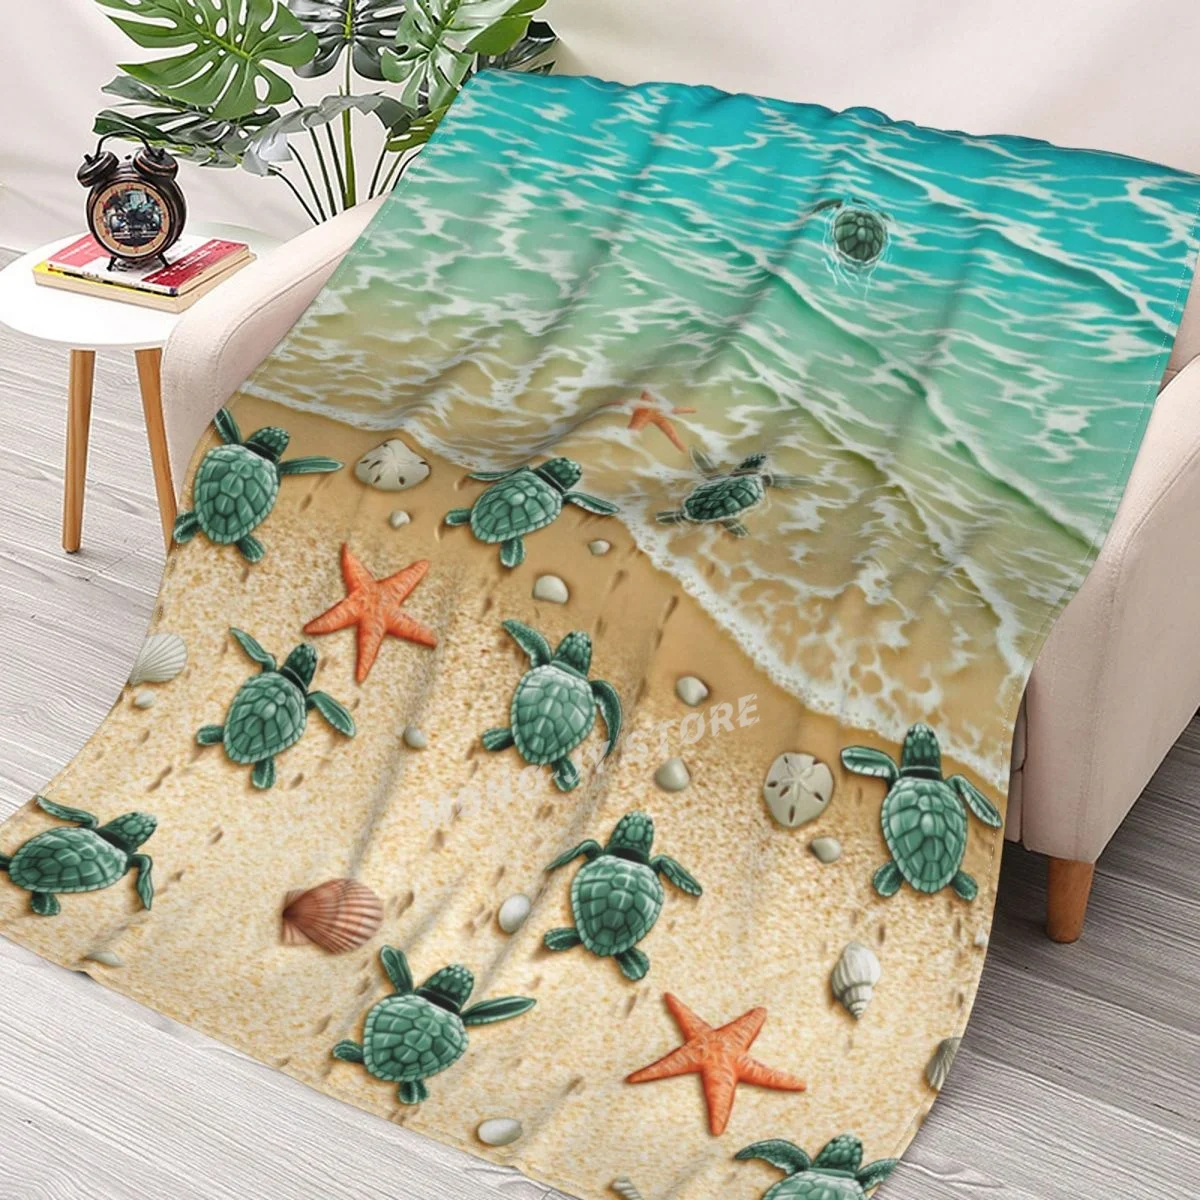 

Turtles On The Beach Throws Blankets Collage Flannel Ultra-Soft Warm picnic blanket bedspread on the bed